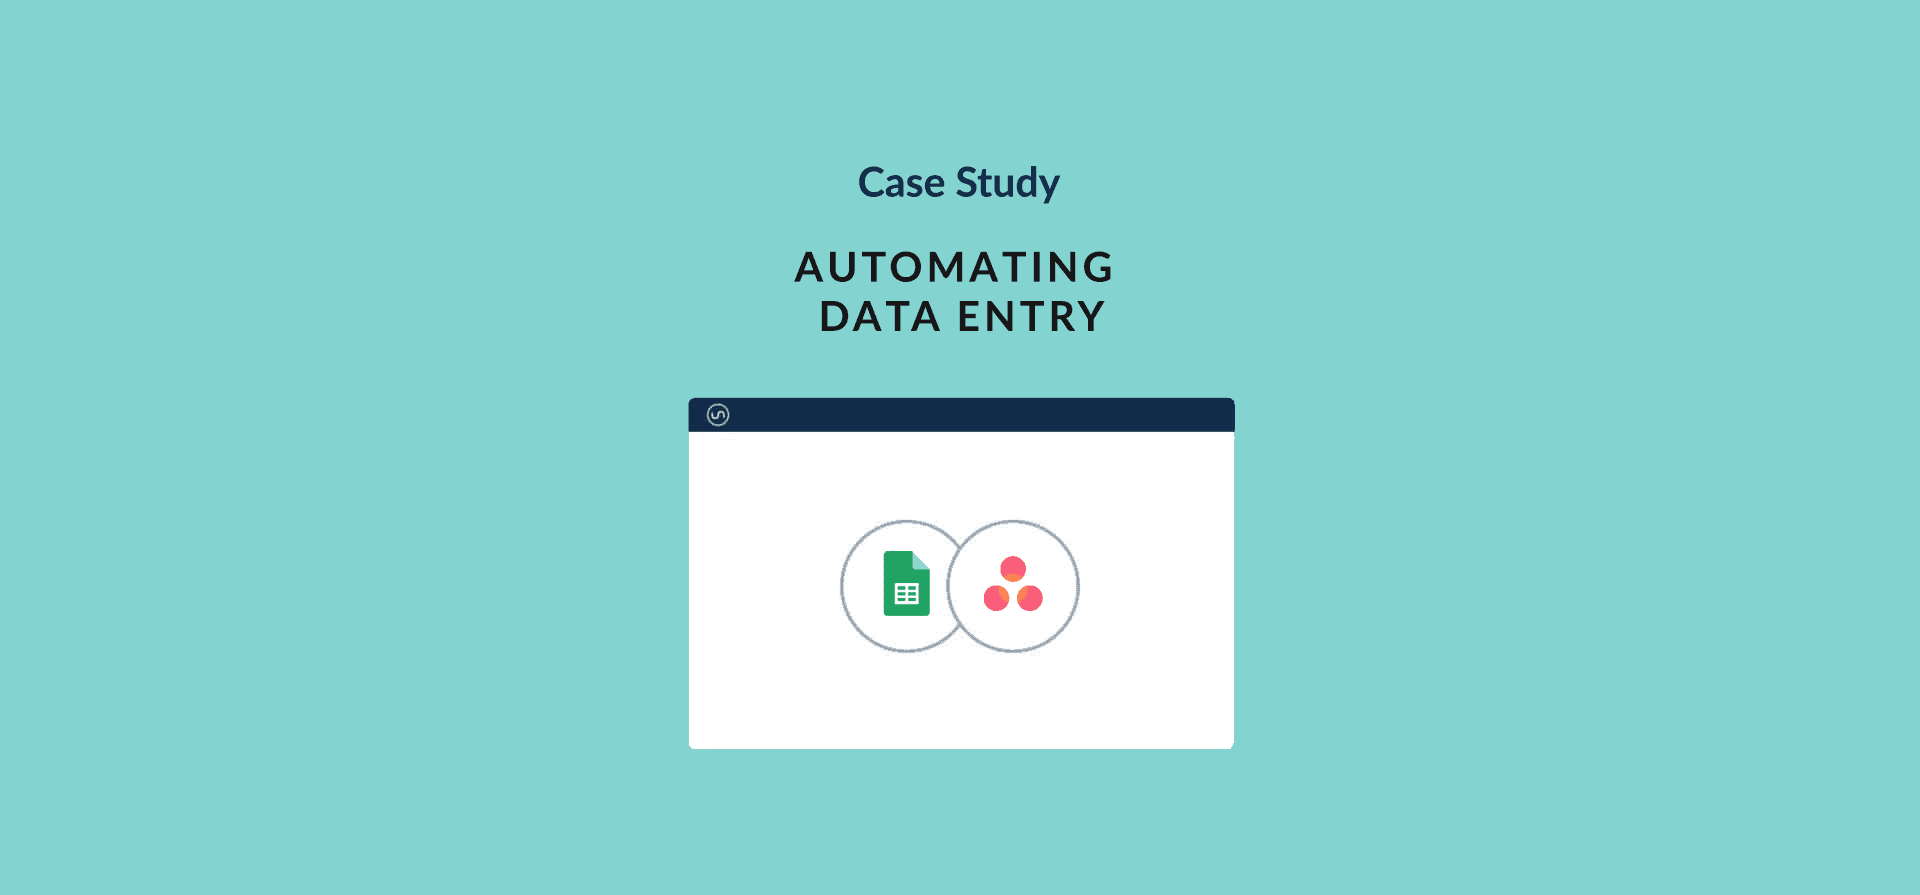 Logos for Asana and Google Sheet, representing the automatic data entry case study.